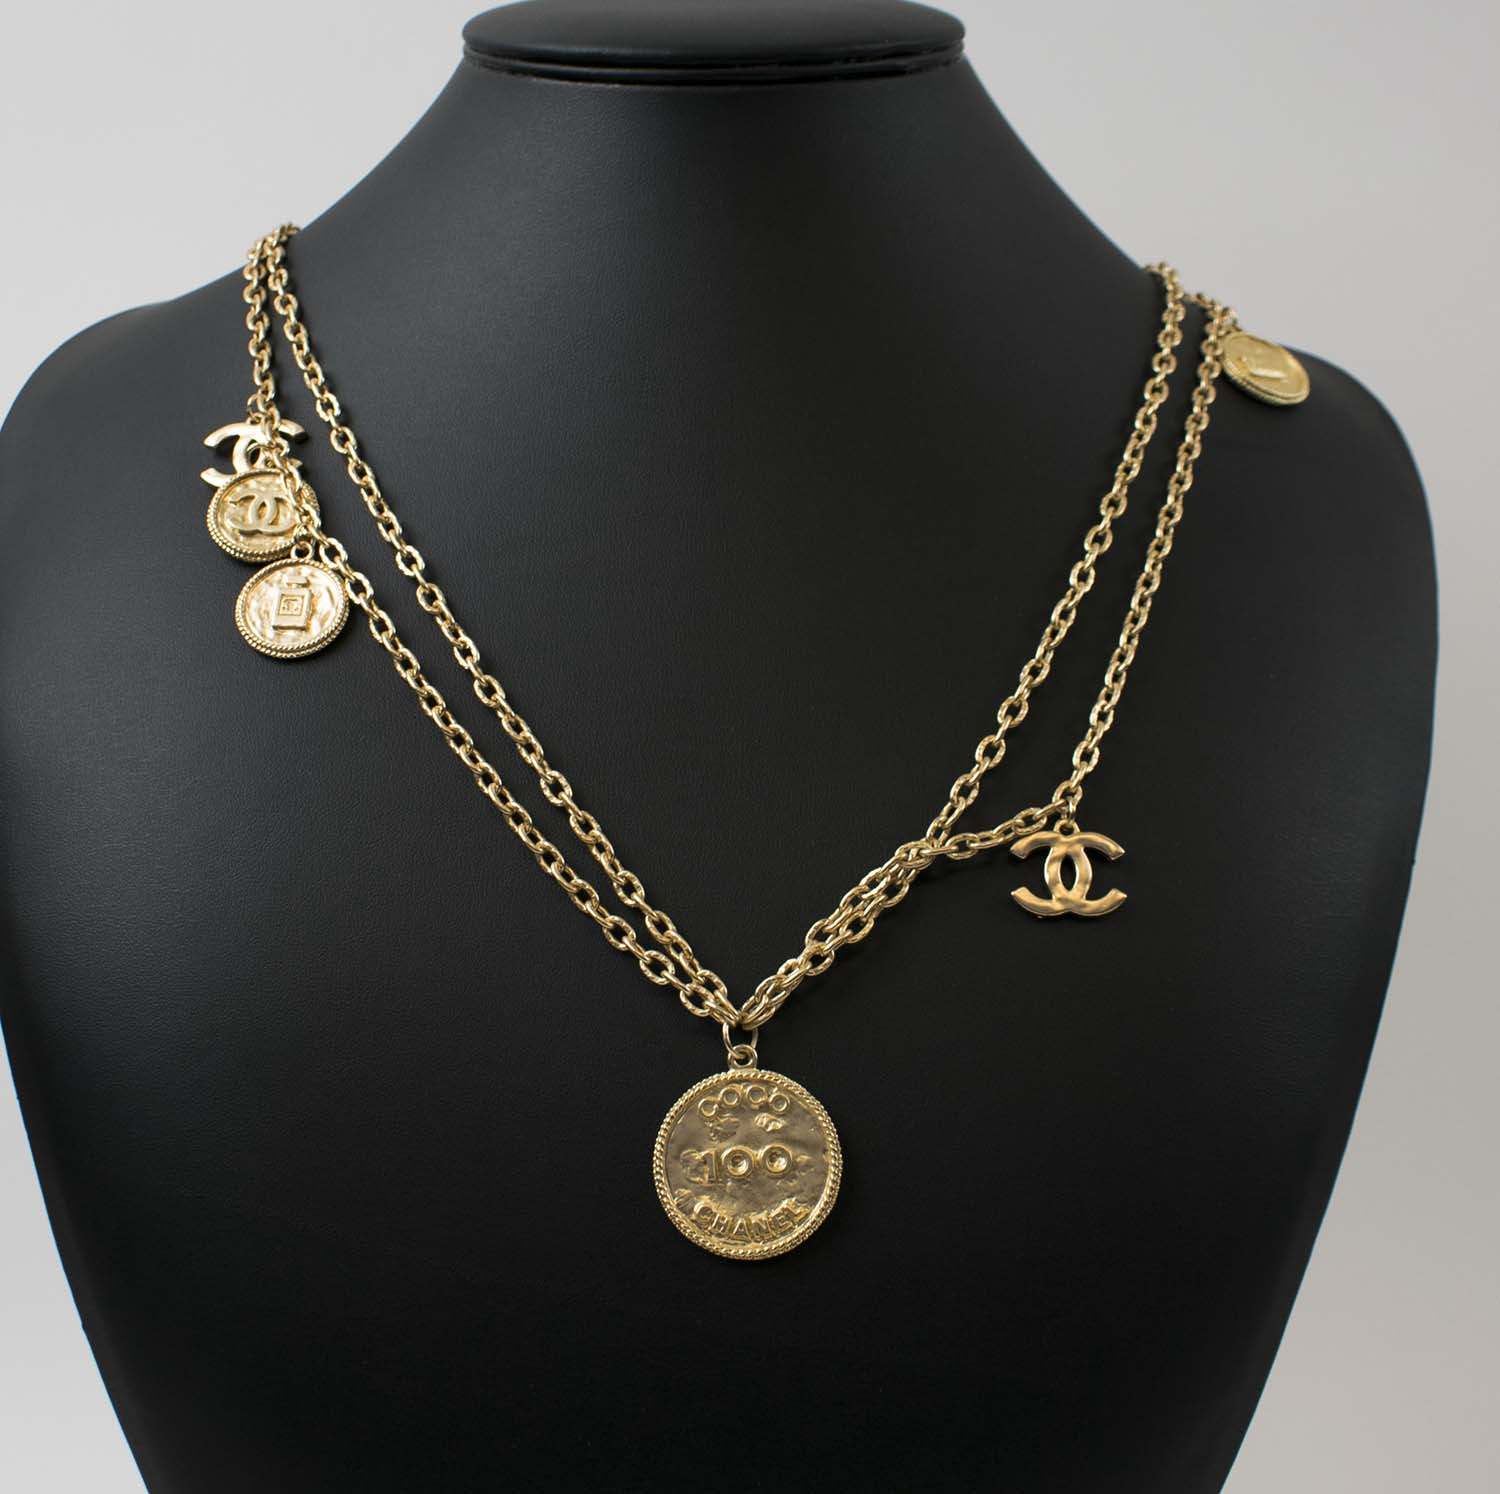 CHANEL 'COIN' NECKLACE, gold tone, plus a pair of matching